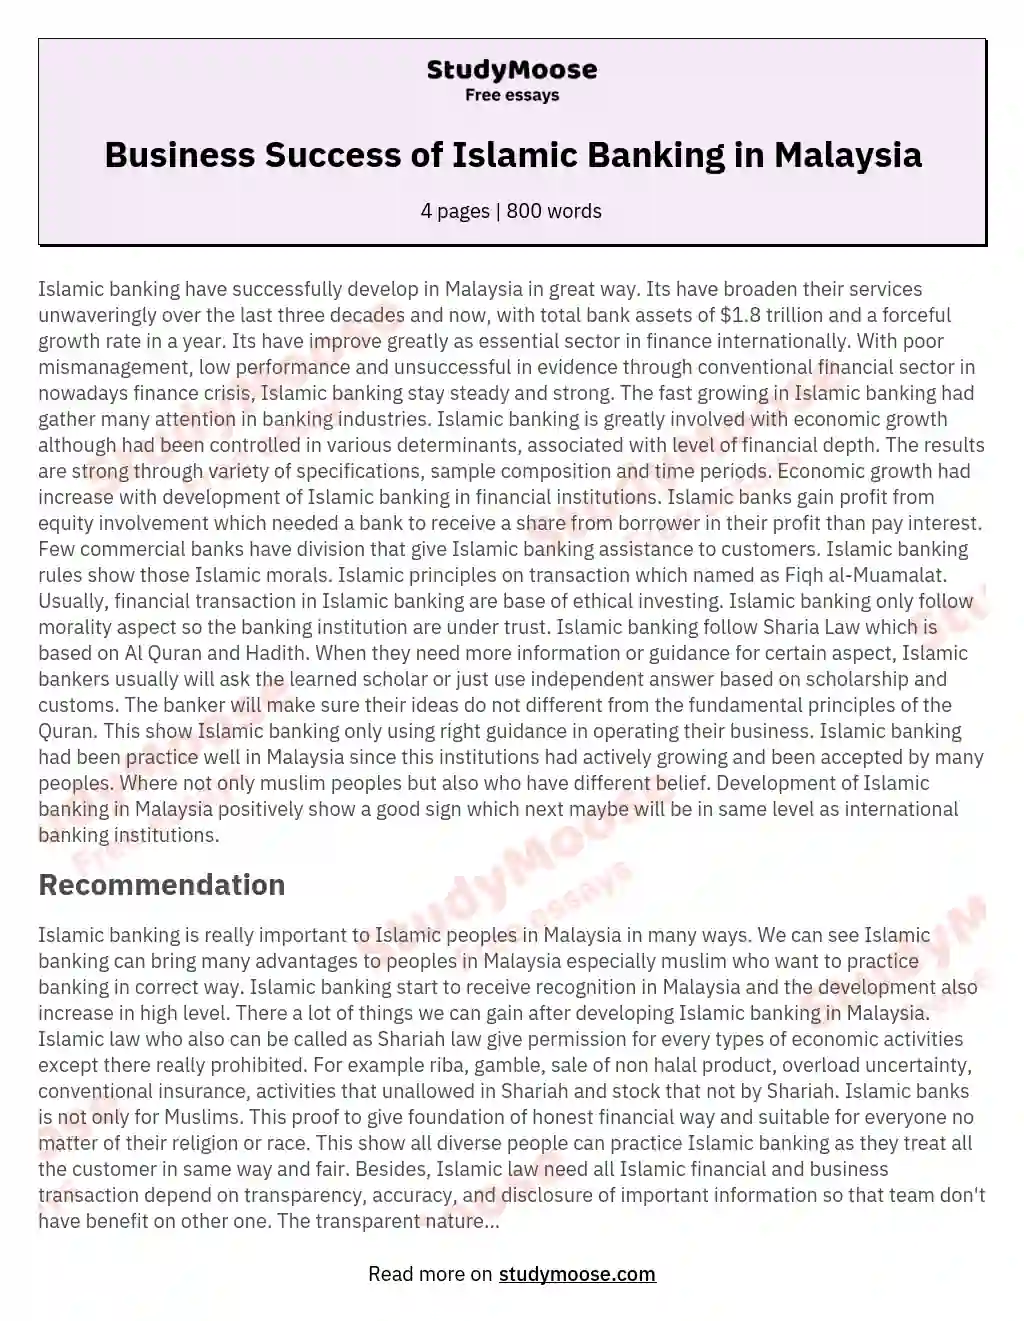 Business Success of Islamic Banking in Malaysia essay